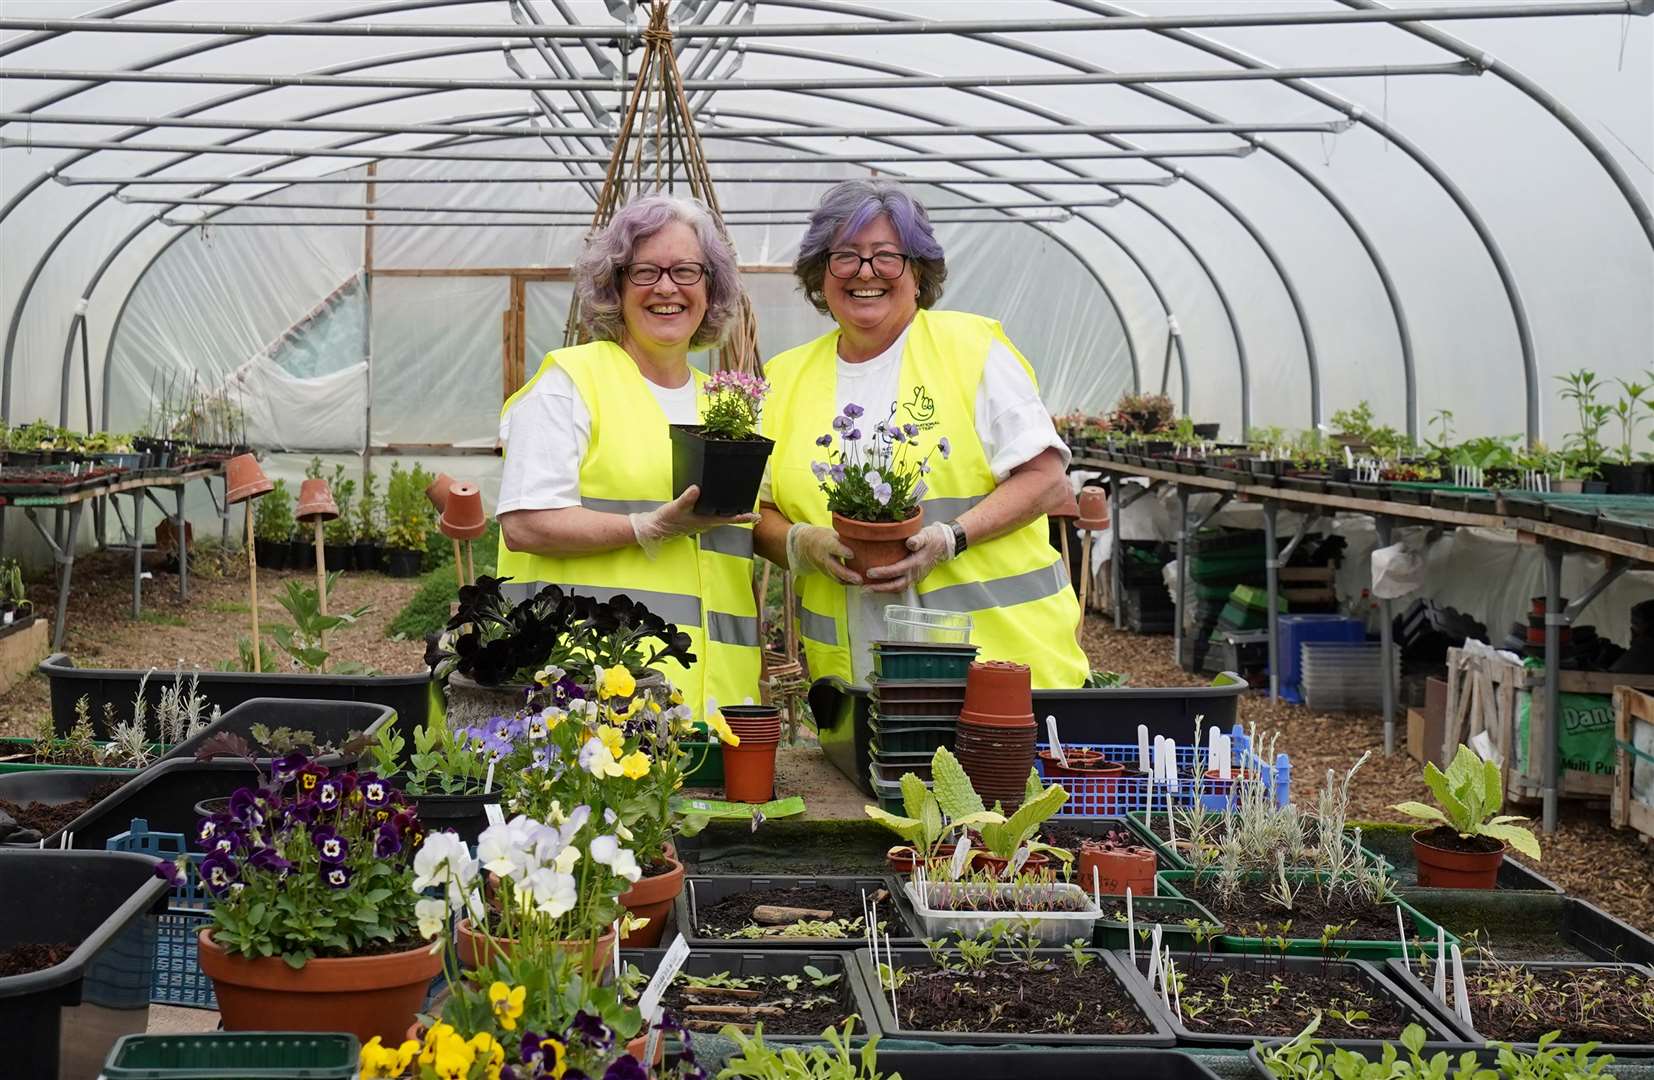 Beverly Cox (left) and Desiree Home of the Winners Workforce plant seeds after volunteering to help the Veterans’ Growth charity(Gareth Fuller/PA Wire)